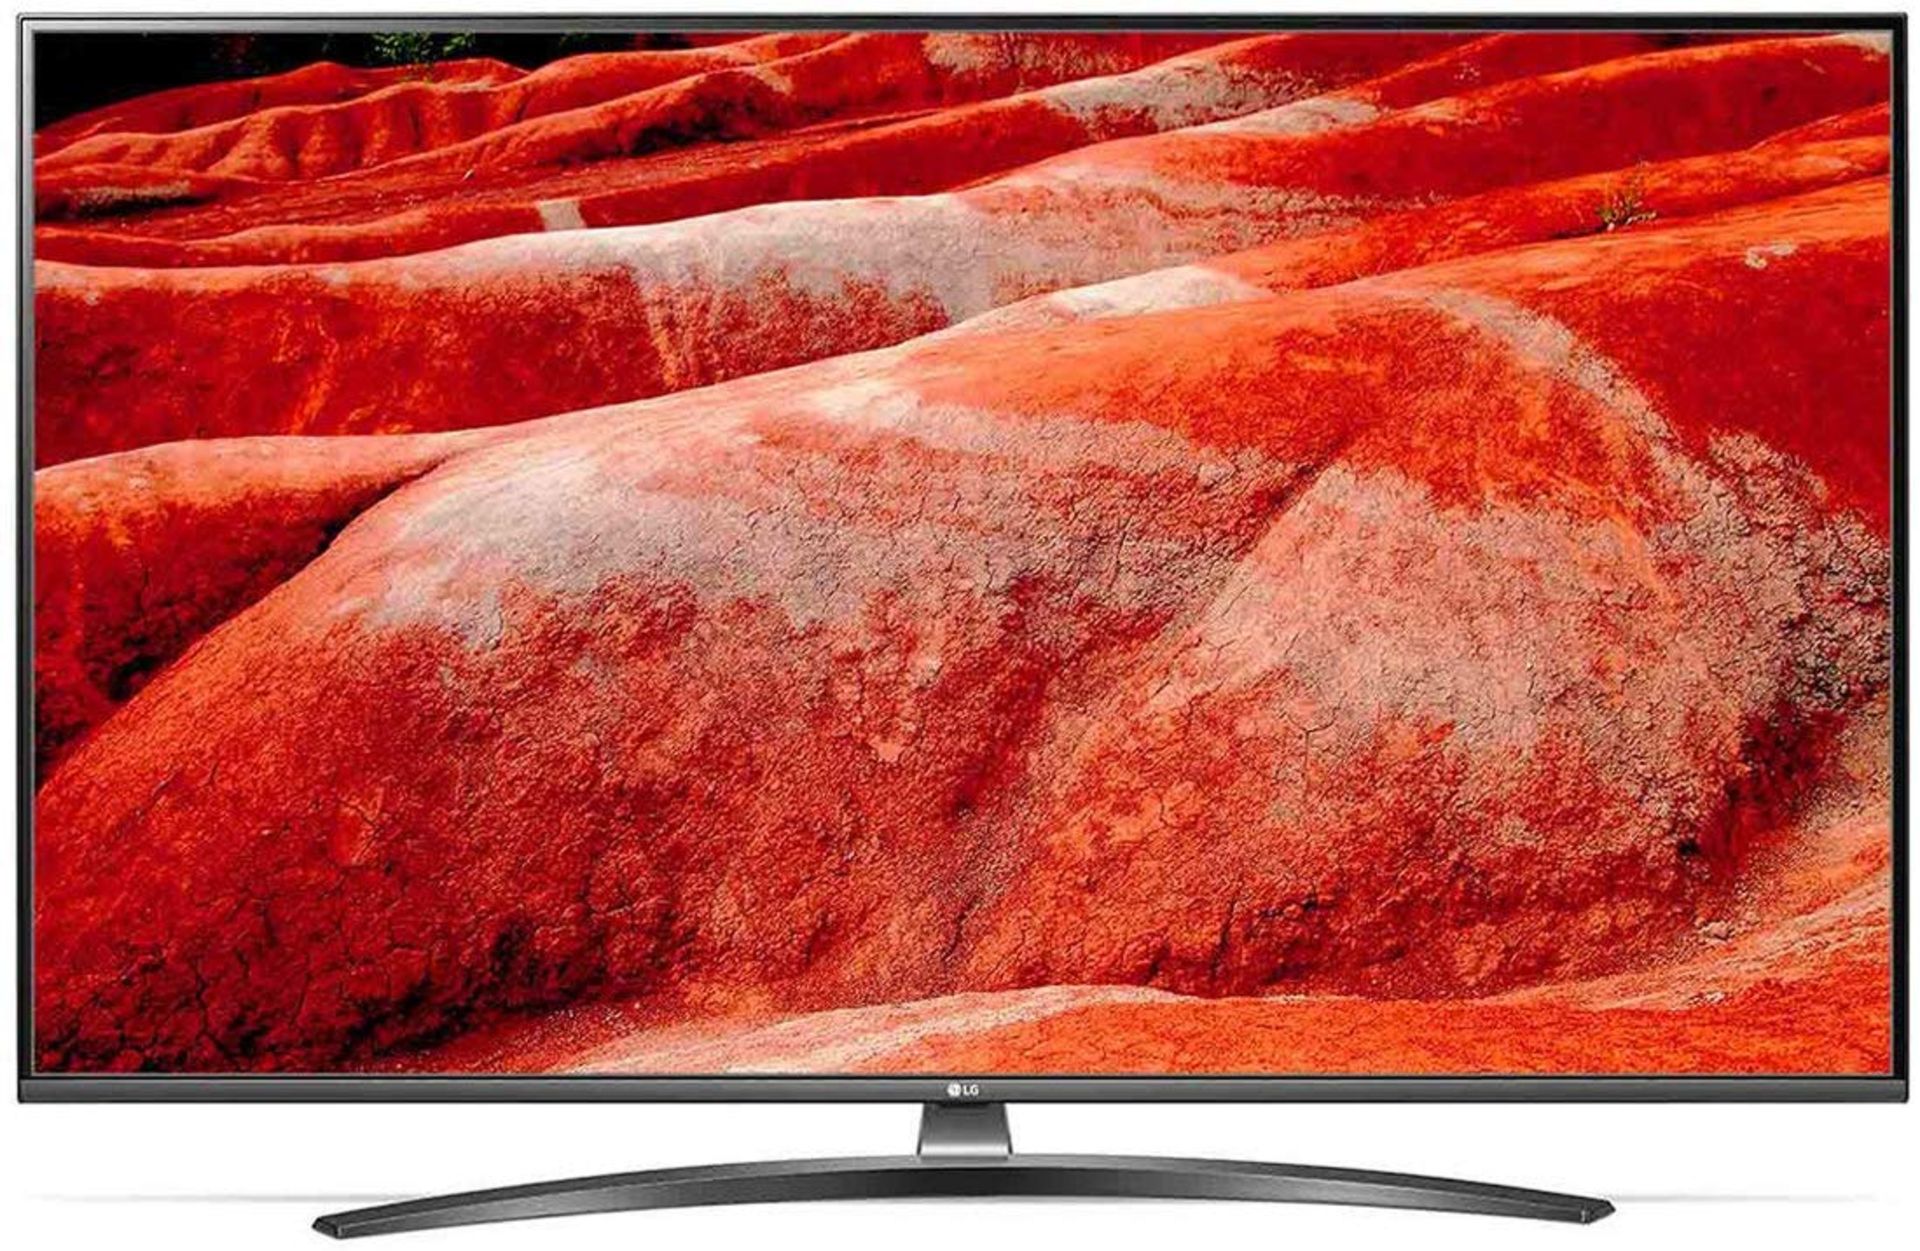 V Grade A LG 55 Inch ACTIVE HDR 4K ULTRA HD LED SMART TV WITH FREEVIEW HD & WEBOS & WIFI - AI TV